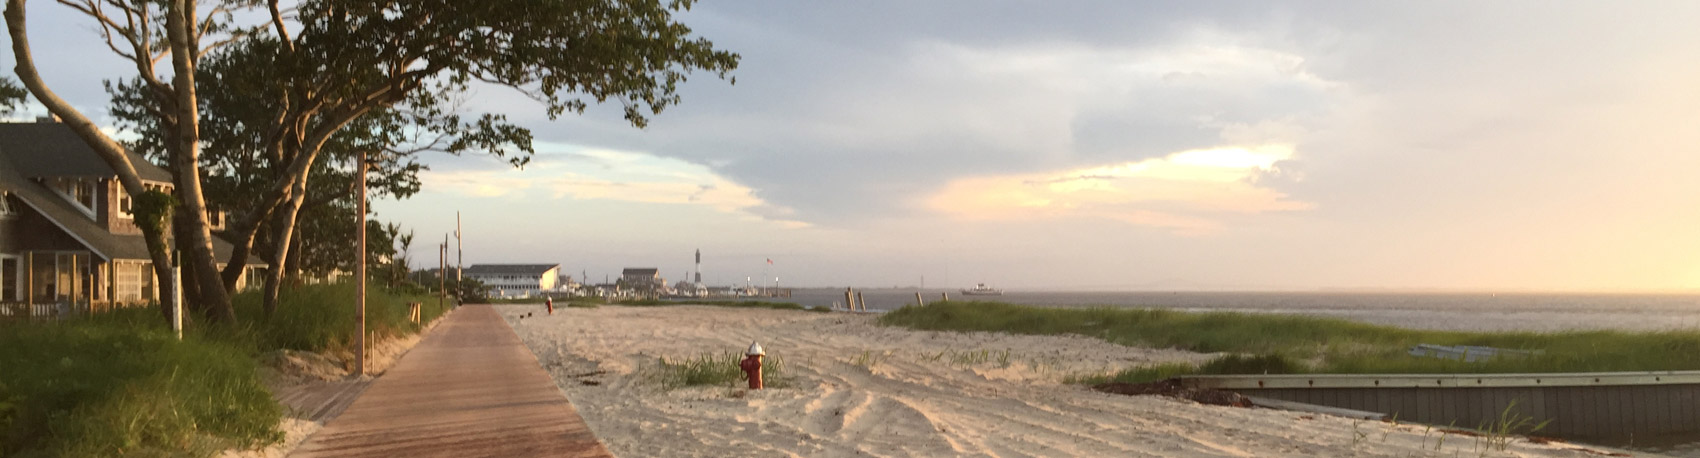 Saltaire-Fire-Island-Bayfront